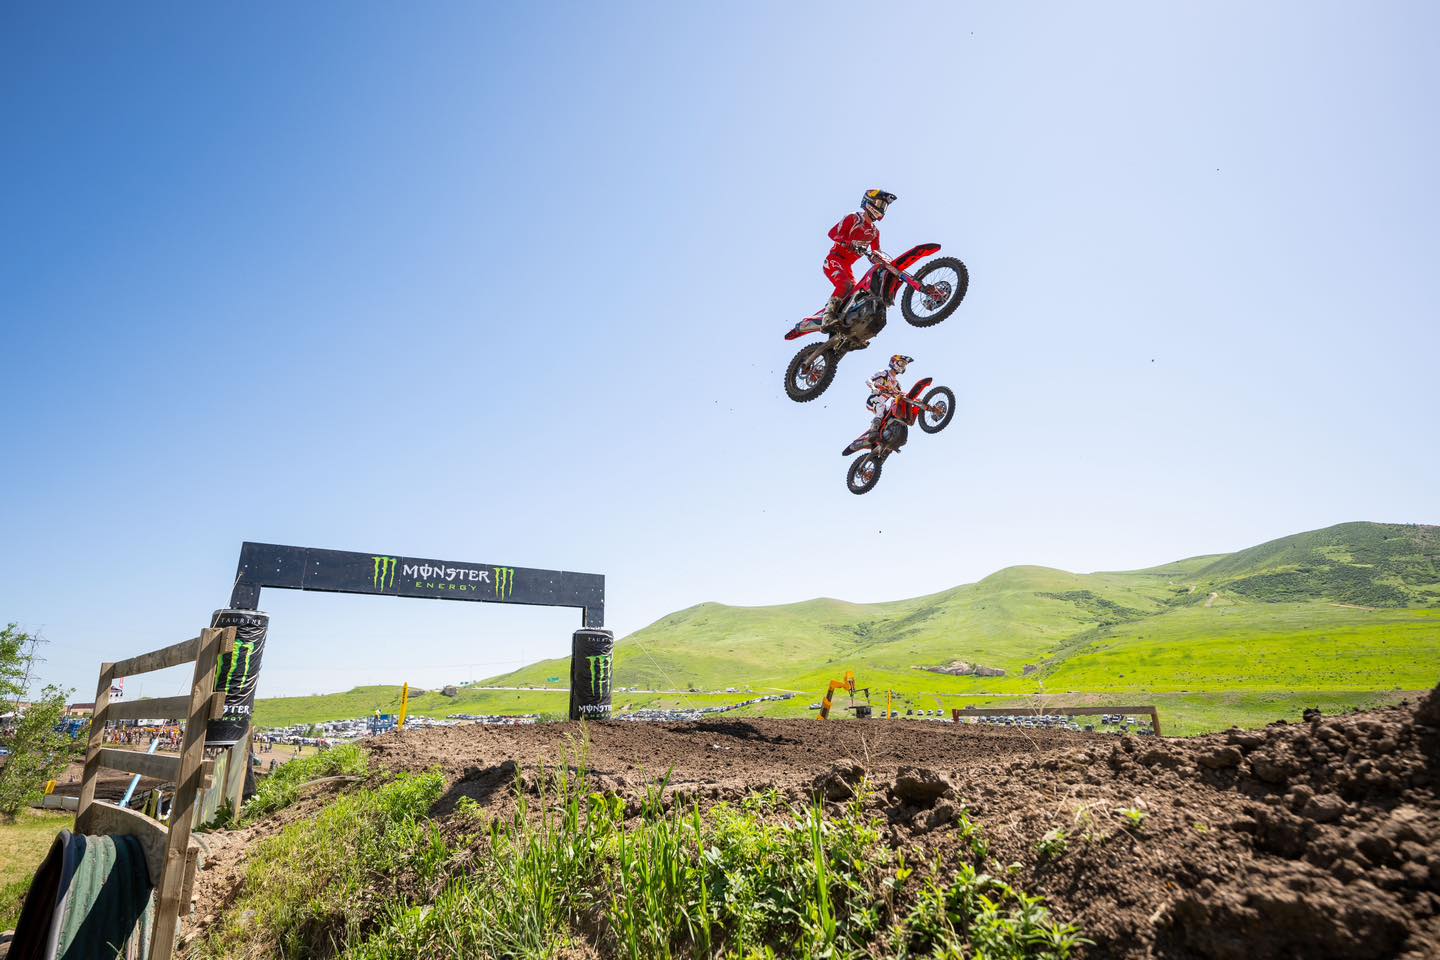 LIVE Results – AMA Pro Motocross Round 4